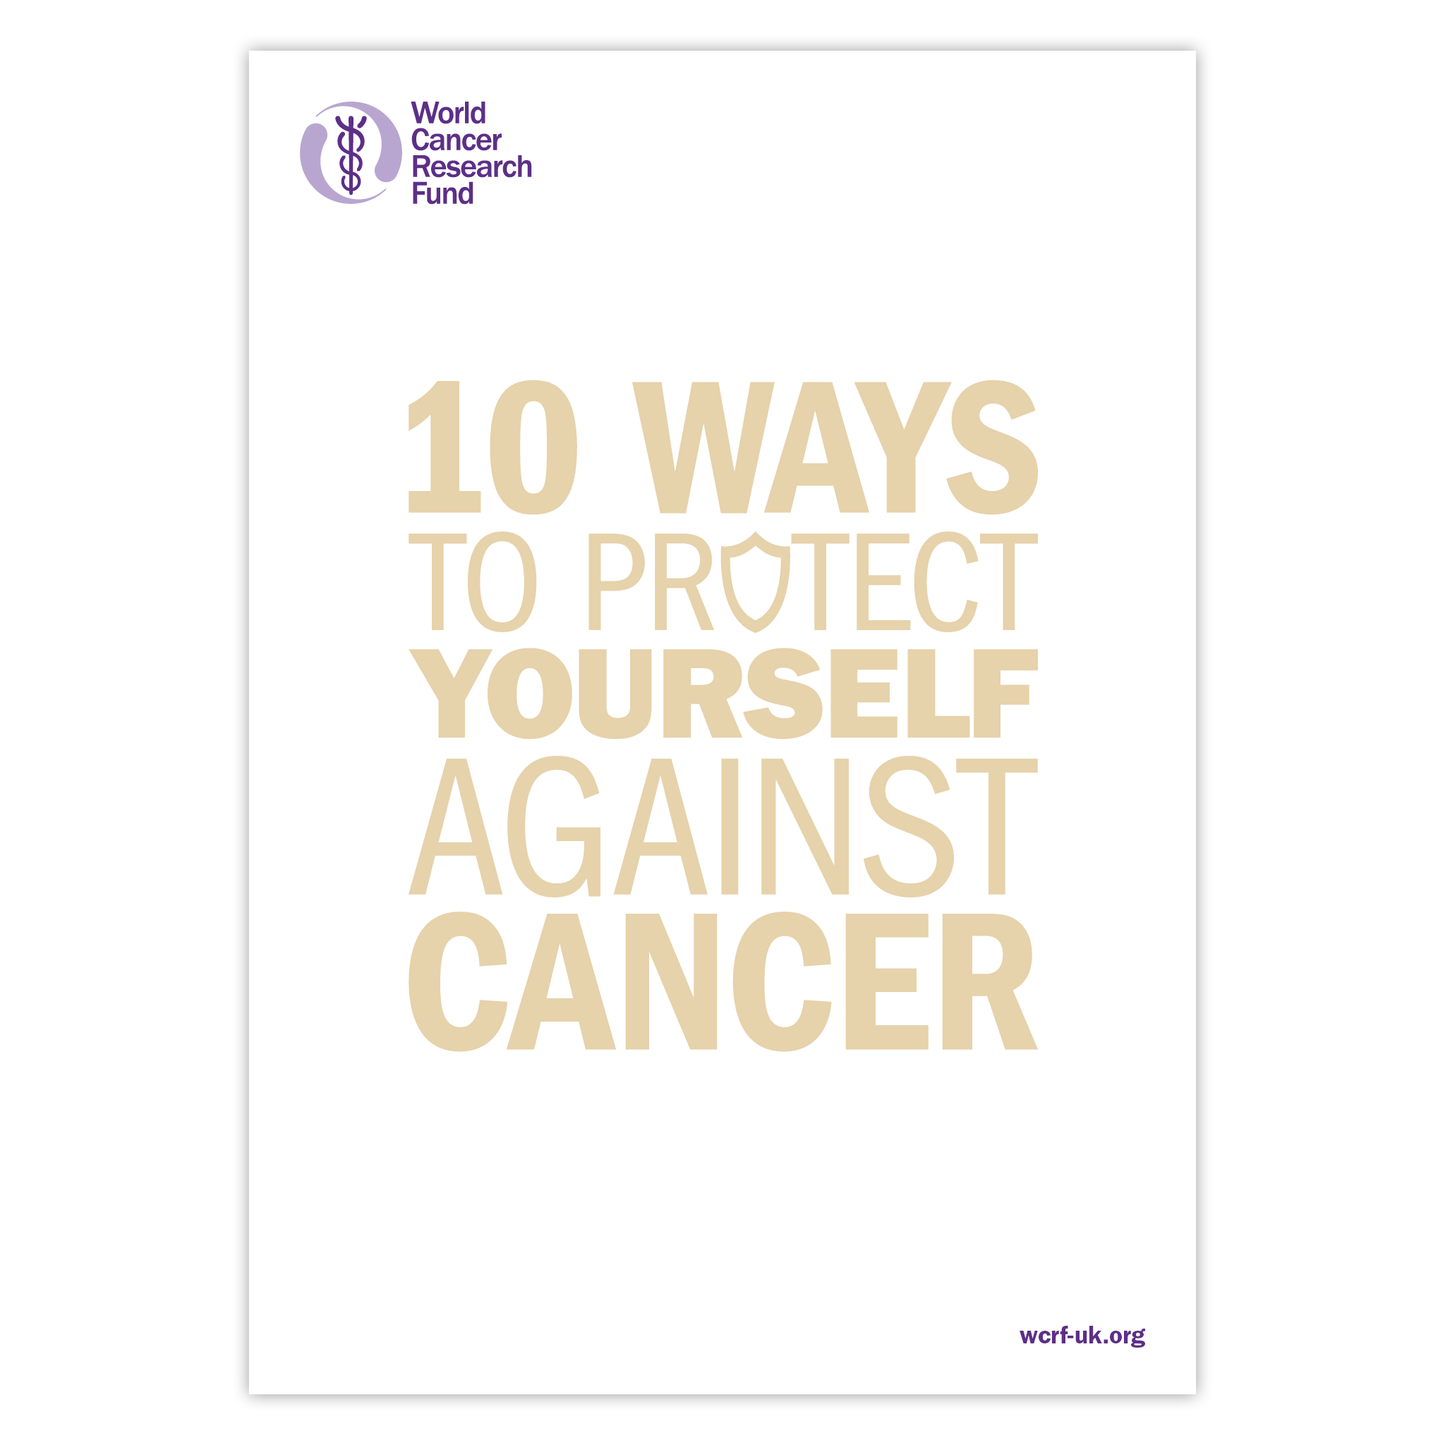 10 ways to protect yourself against cancer